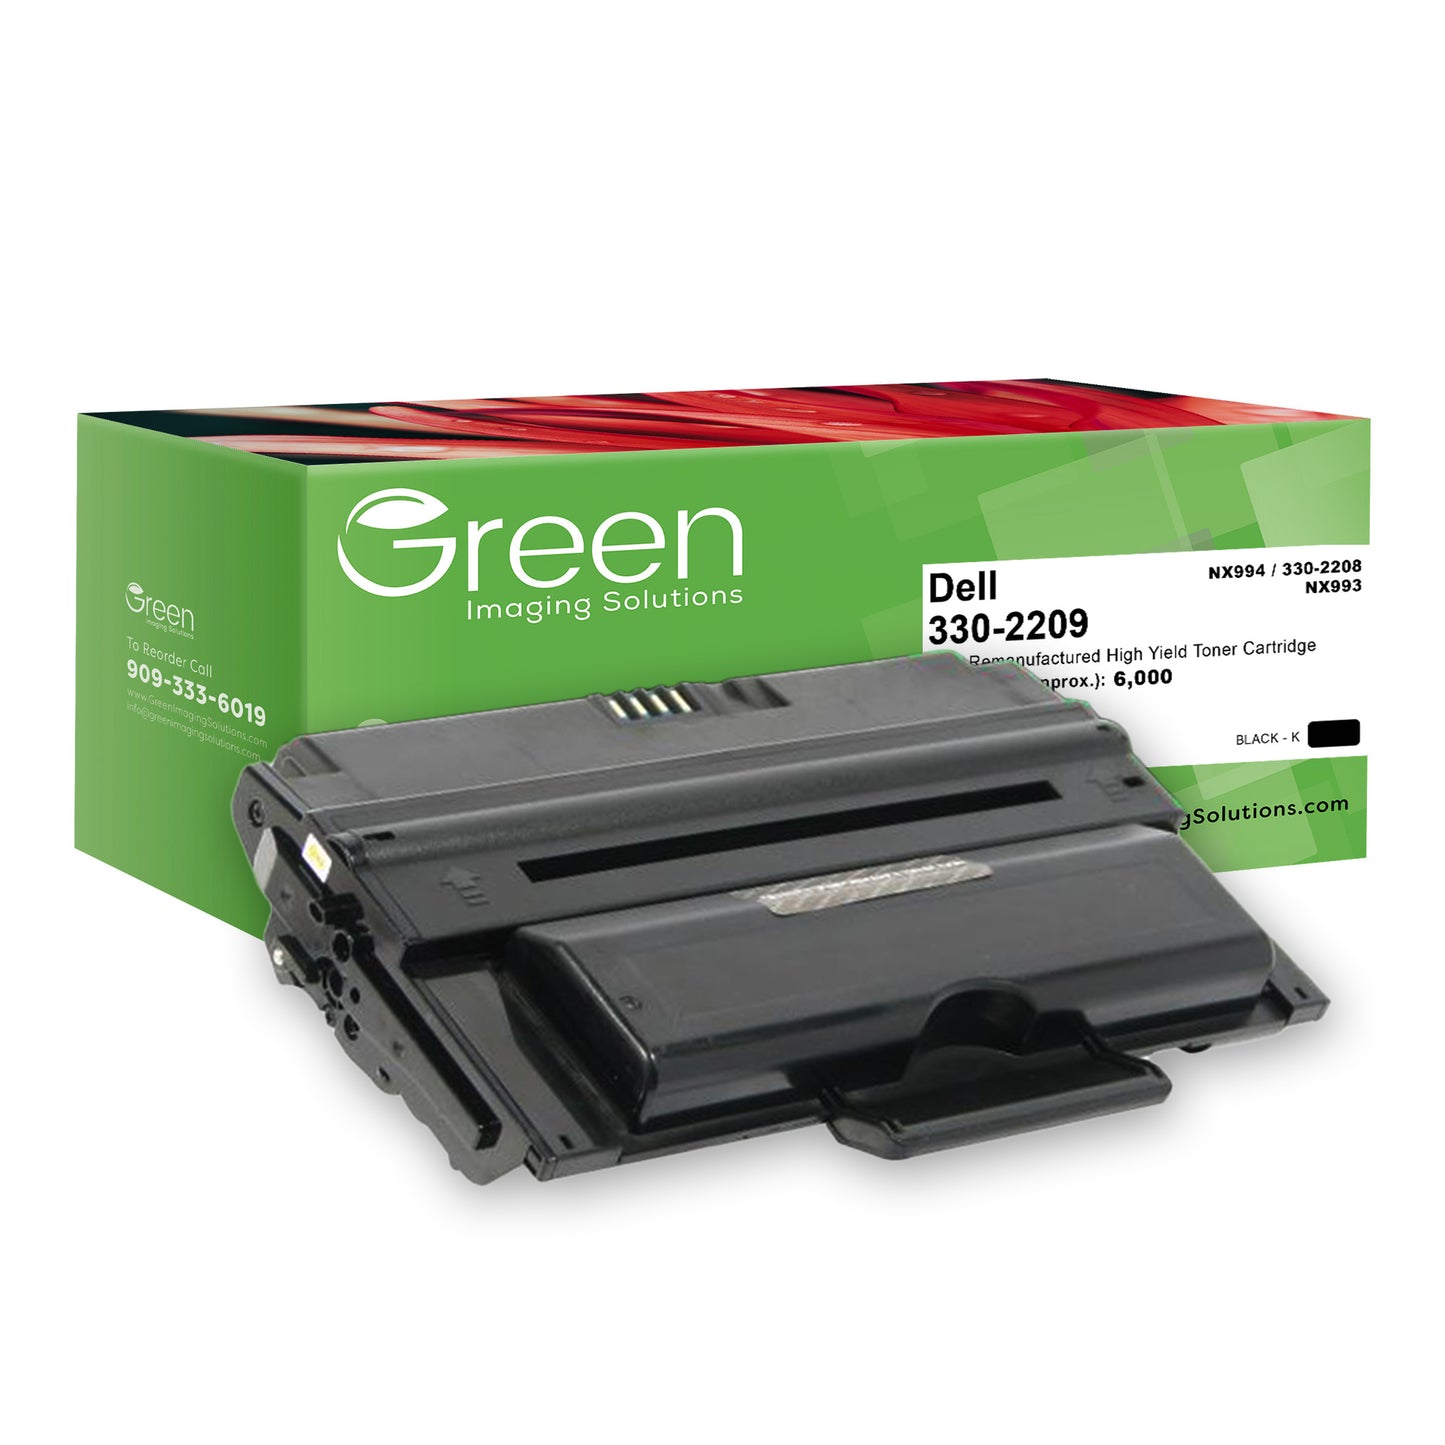 Green Imaging Solutions USA Remanufactured High Yield Toner Cartridge for Dell 2335DN